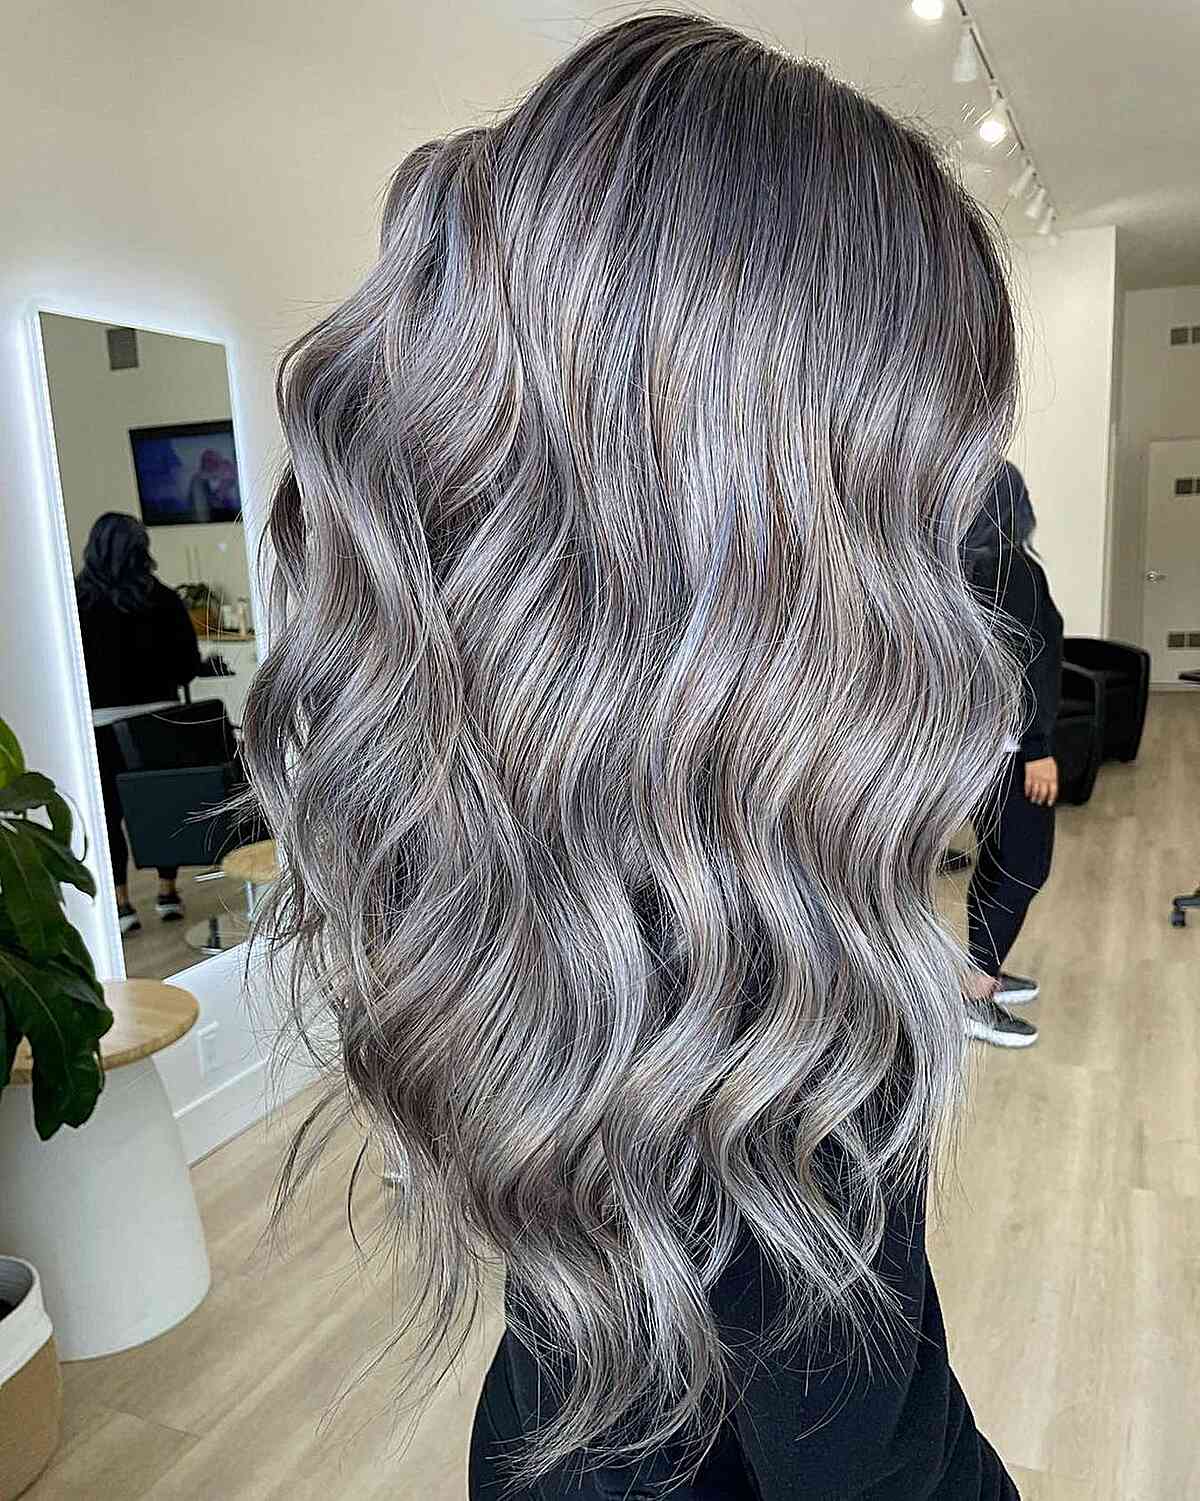 Long Wavy Silver Balayage Hair with Dimensional Silver Tones